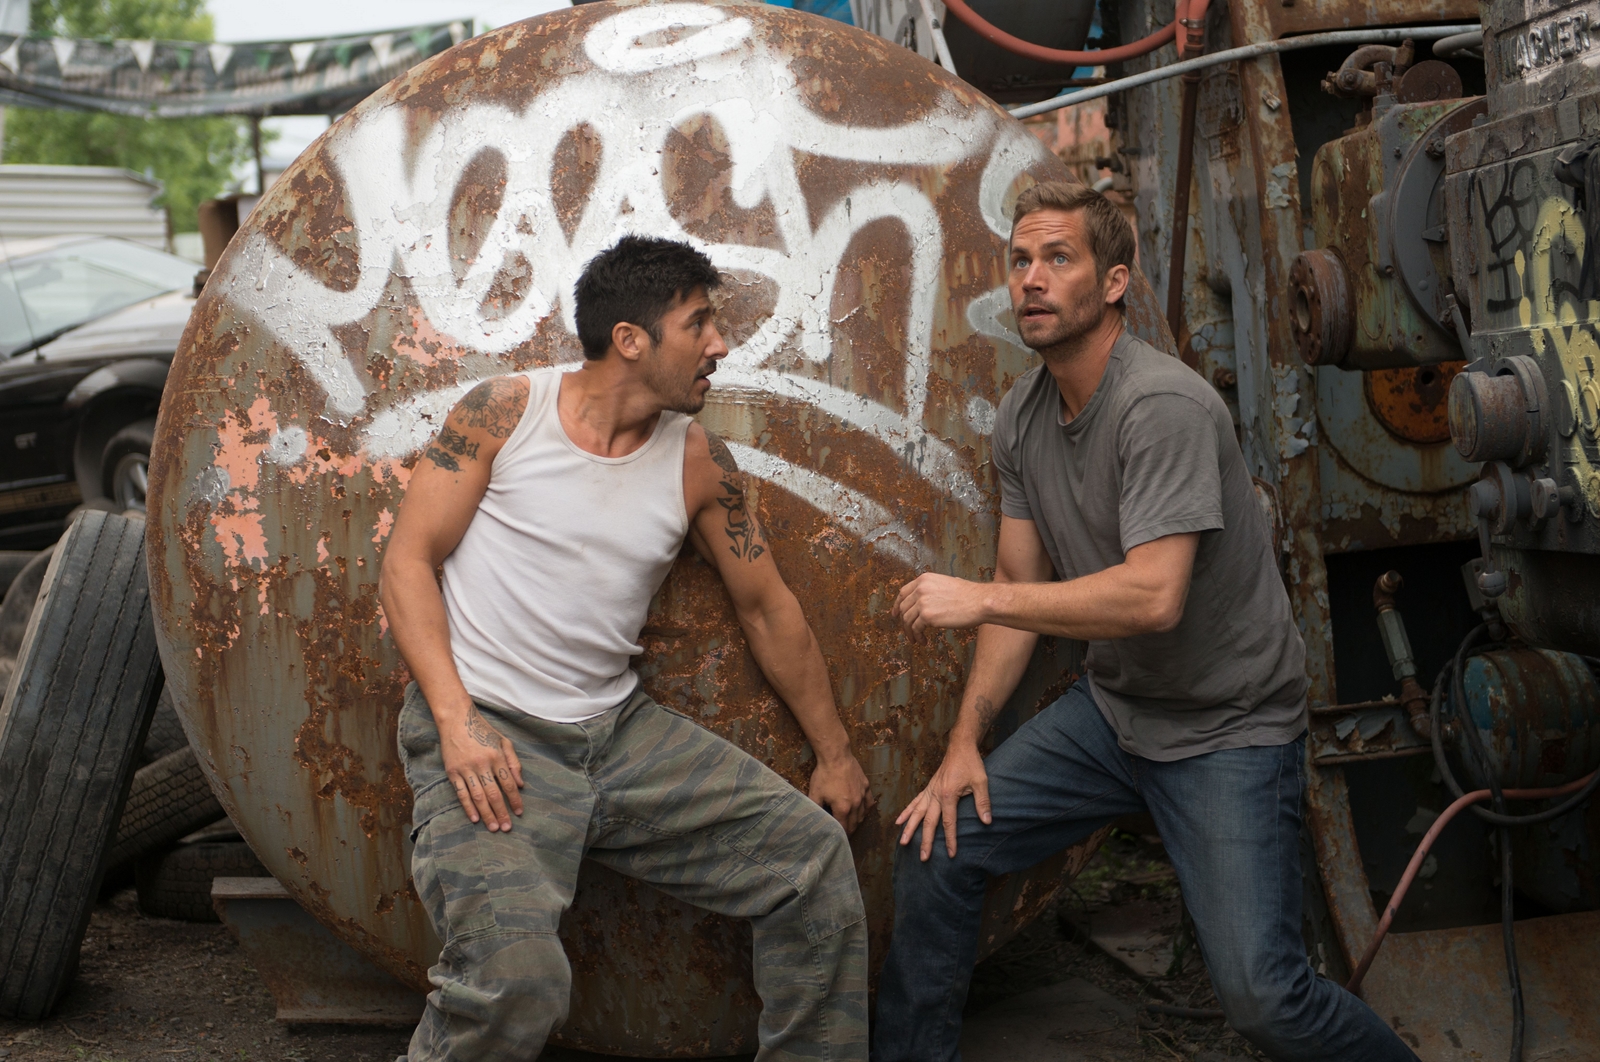 BRICK MANSIONS Doesn’t Improve Upon Its Source Material